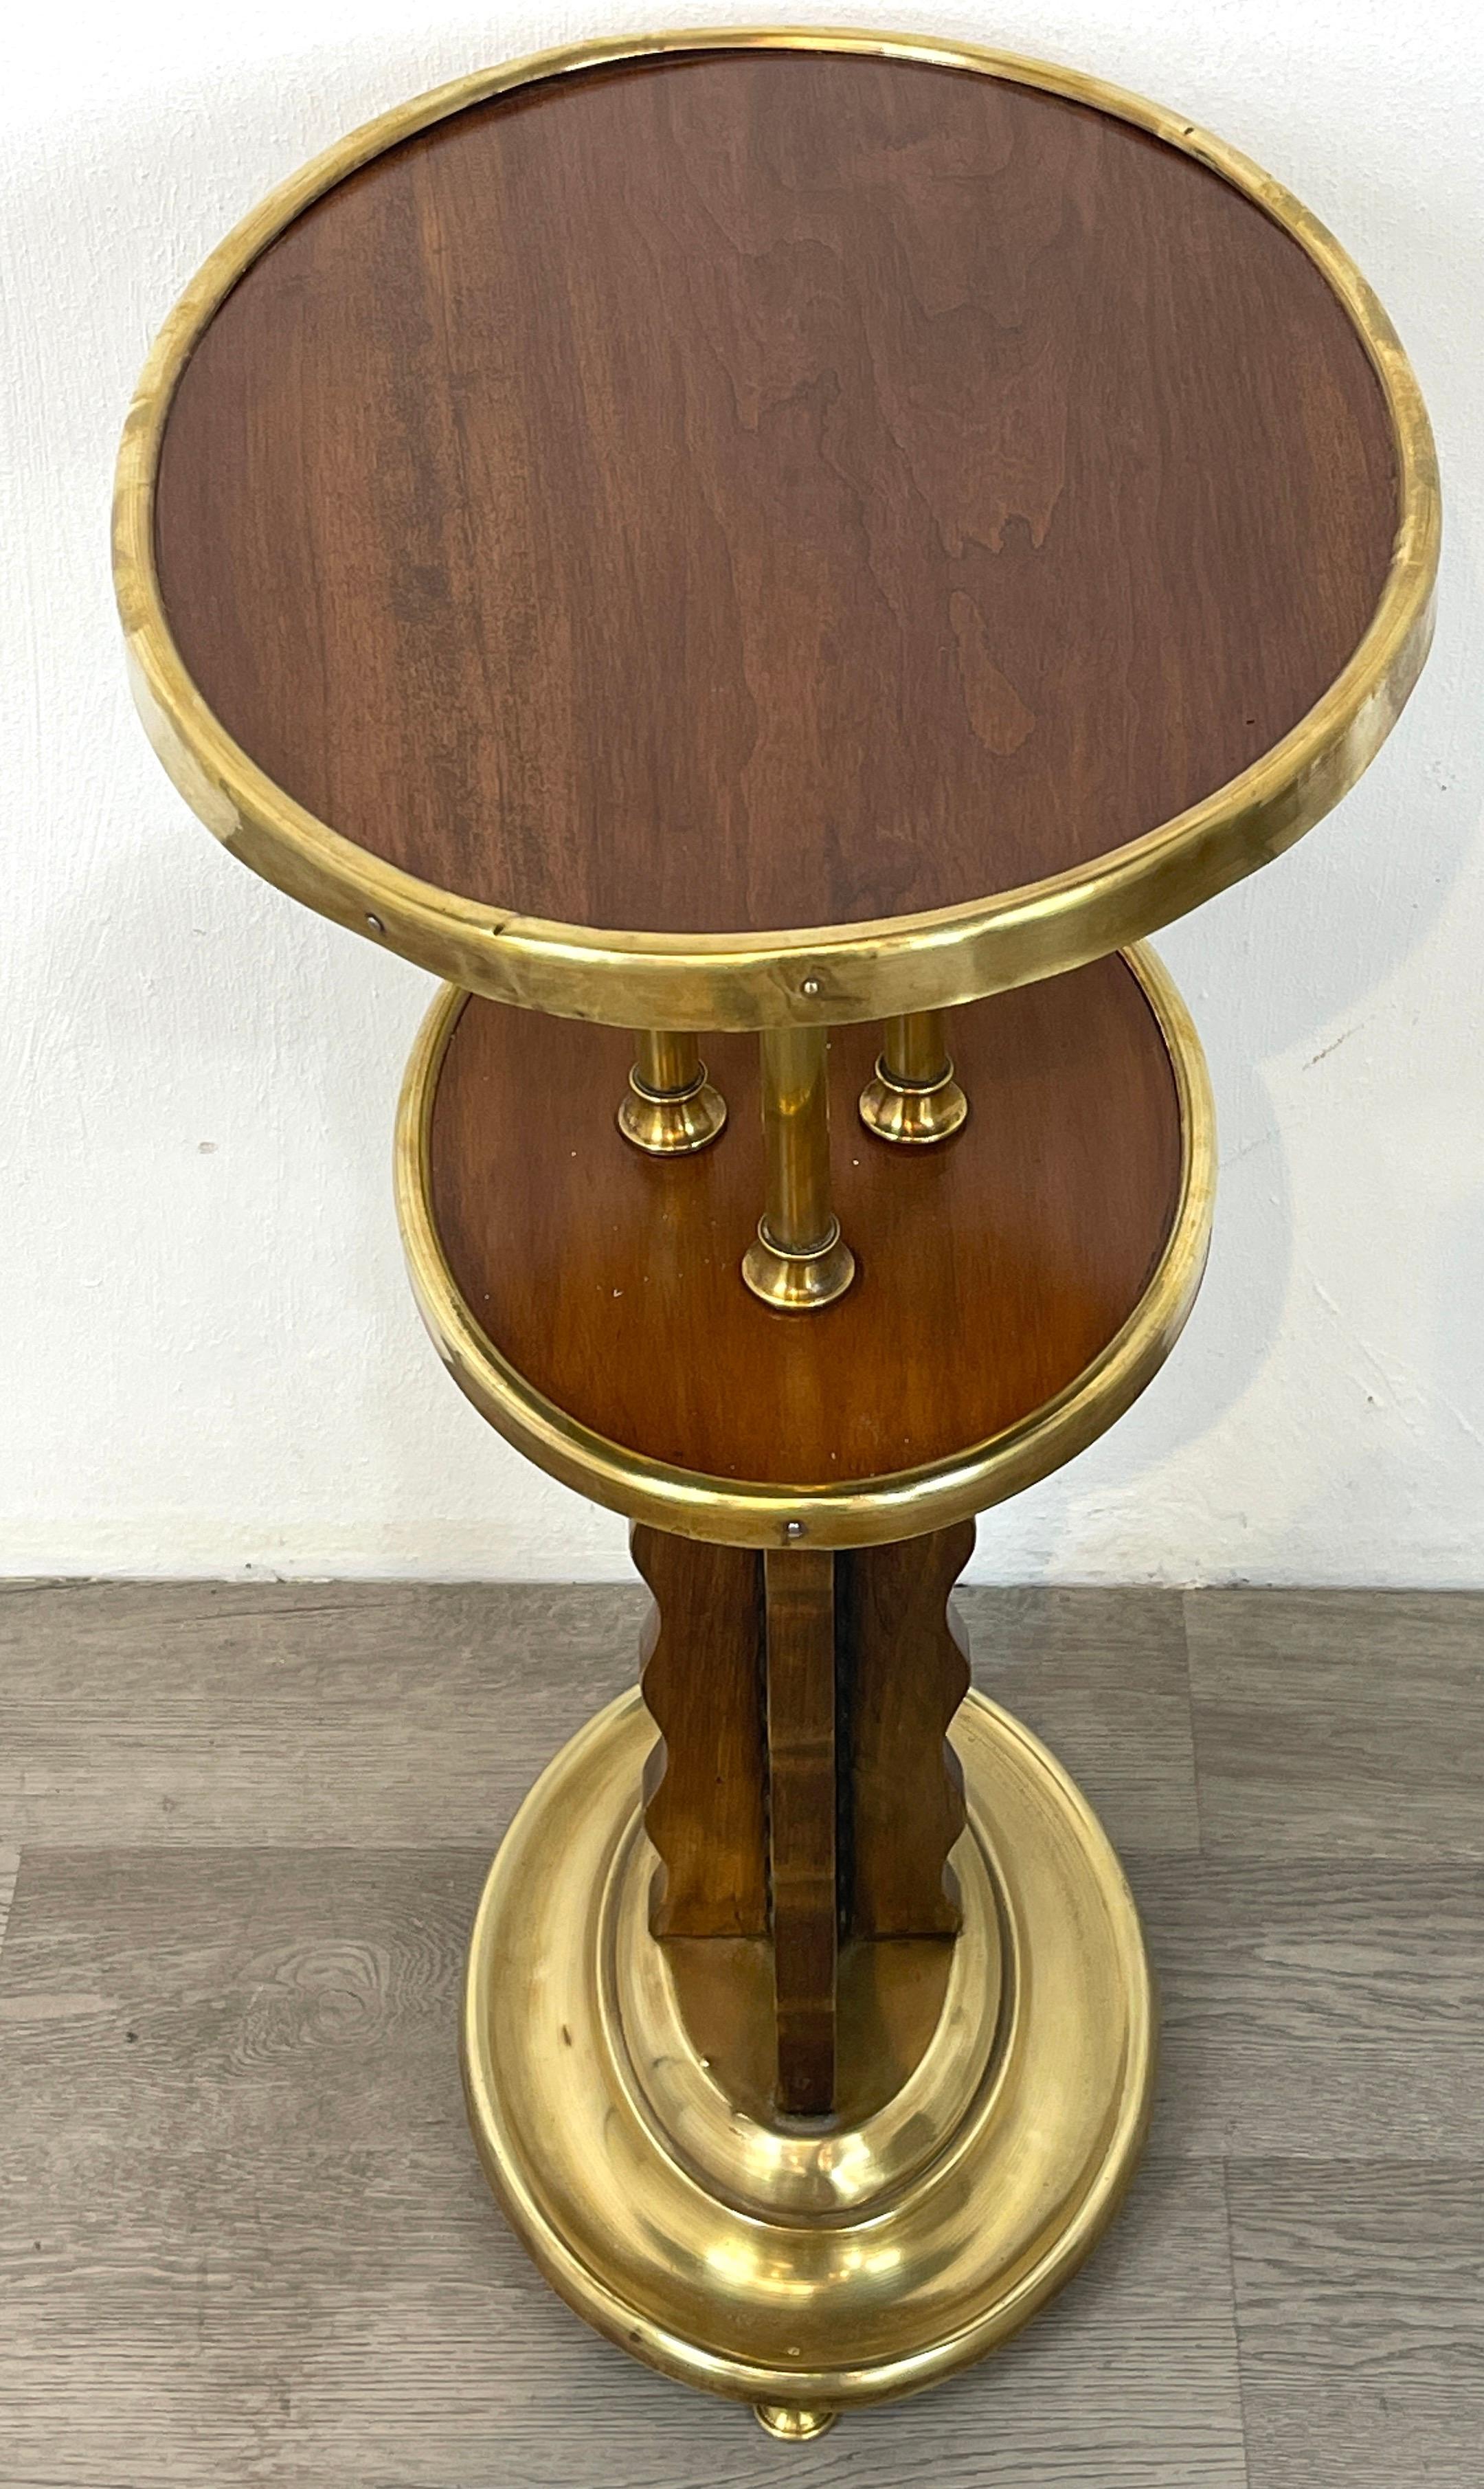 Vienna Secession Viennese Secession Brass Mounted Hardwood Side Table, Austria C. 1920 For Sale